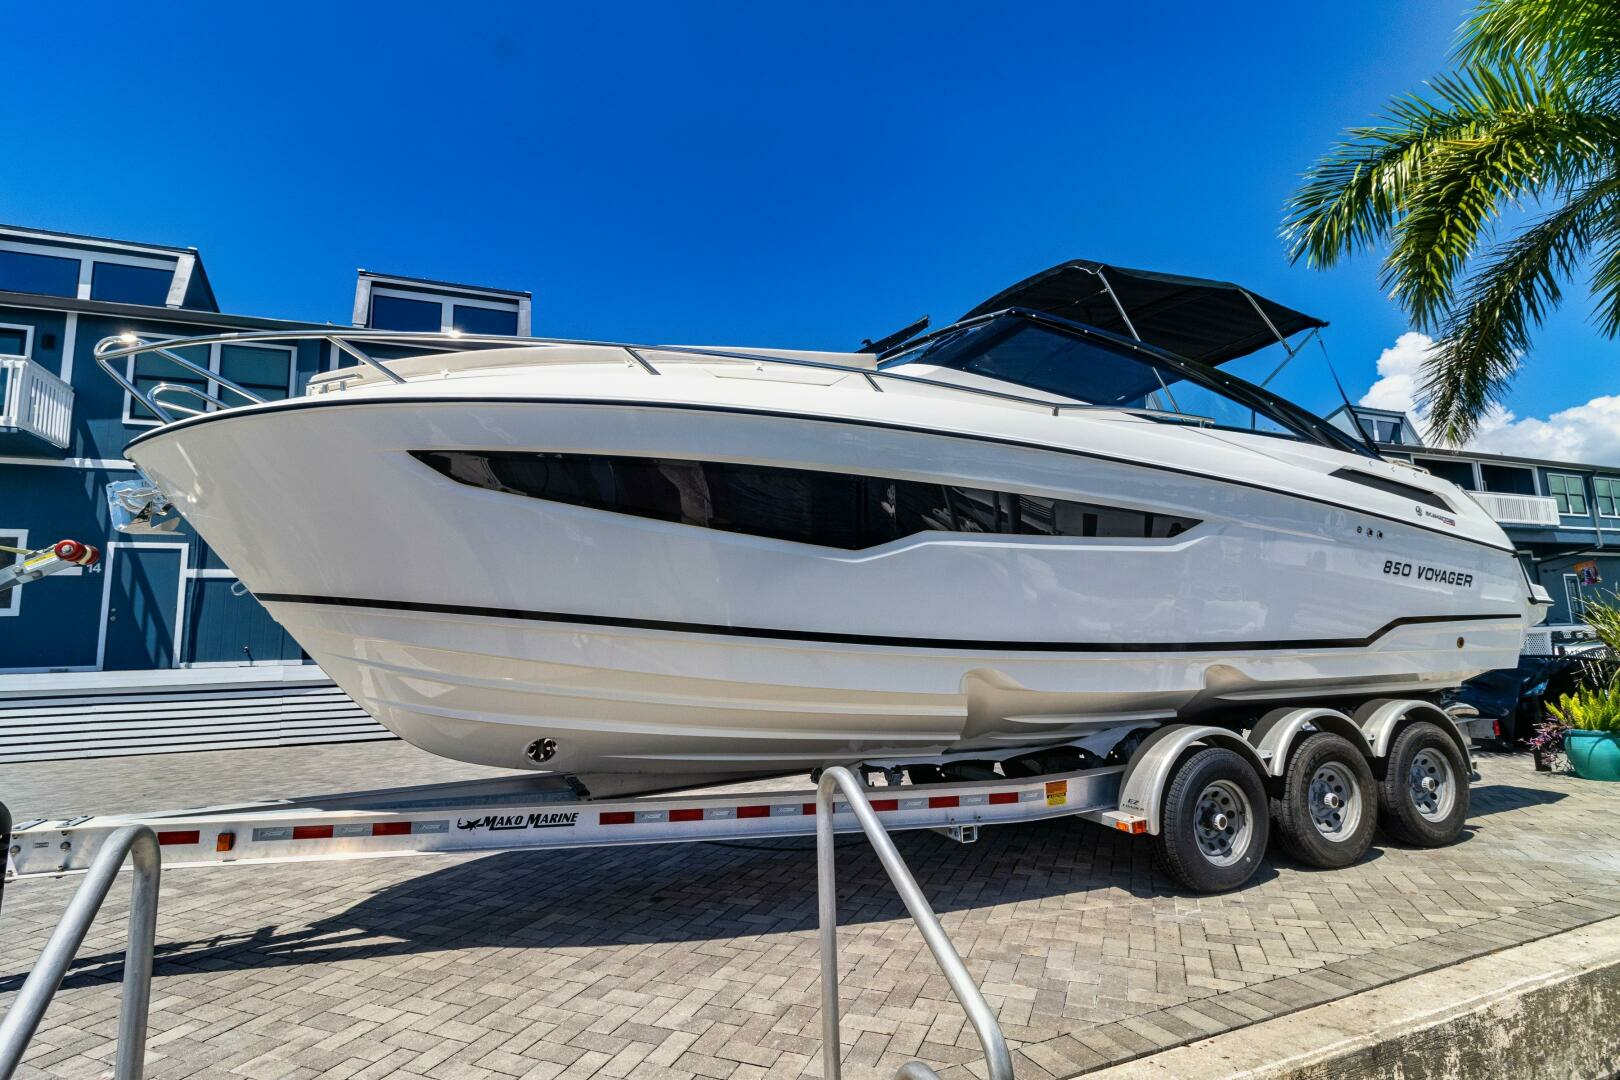 the Skamander 850 Voyager from Hussar Yachts, powered by twin 225 Mercury outboards. She has a full cabin and head, and is a performance machine with a cruising speed of 30 MPH and a fantastic ride.